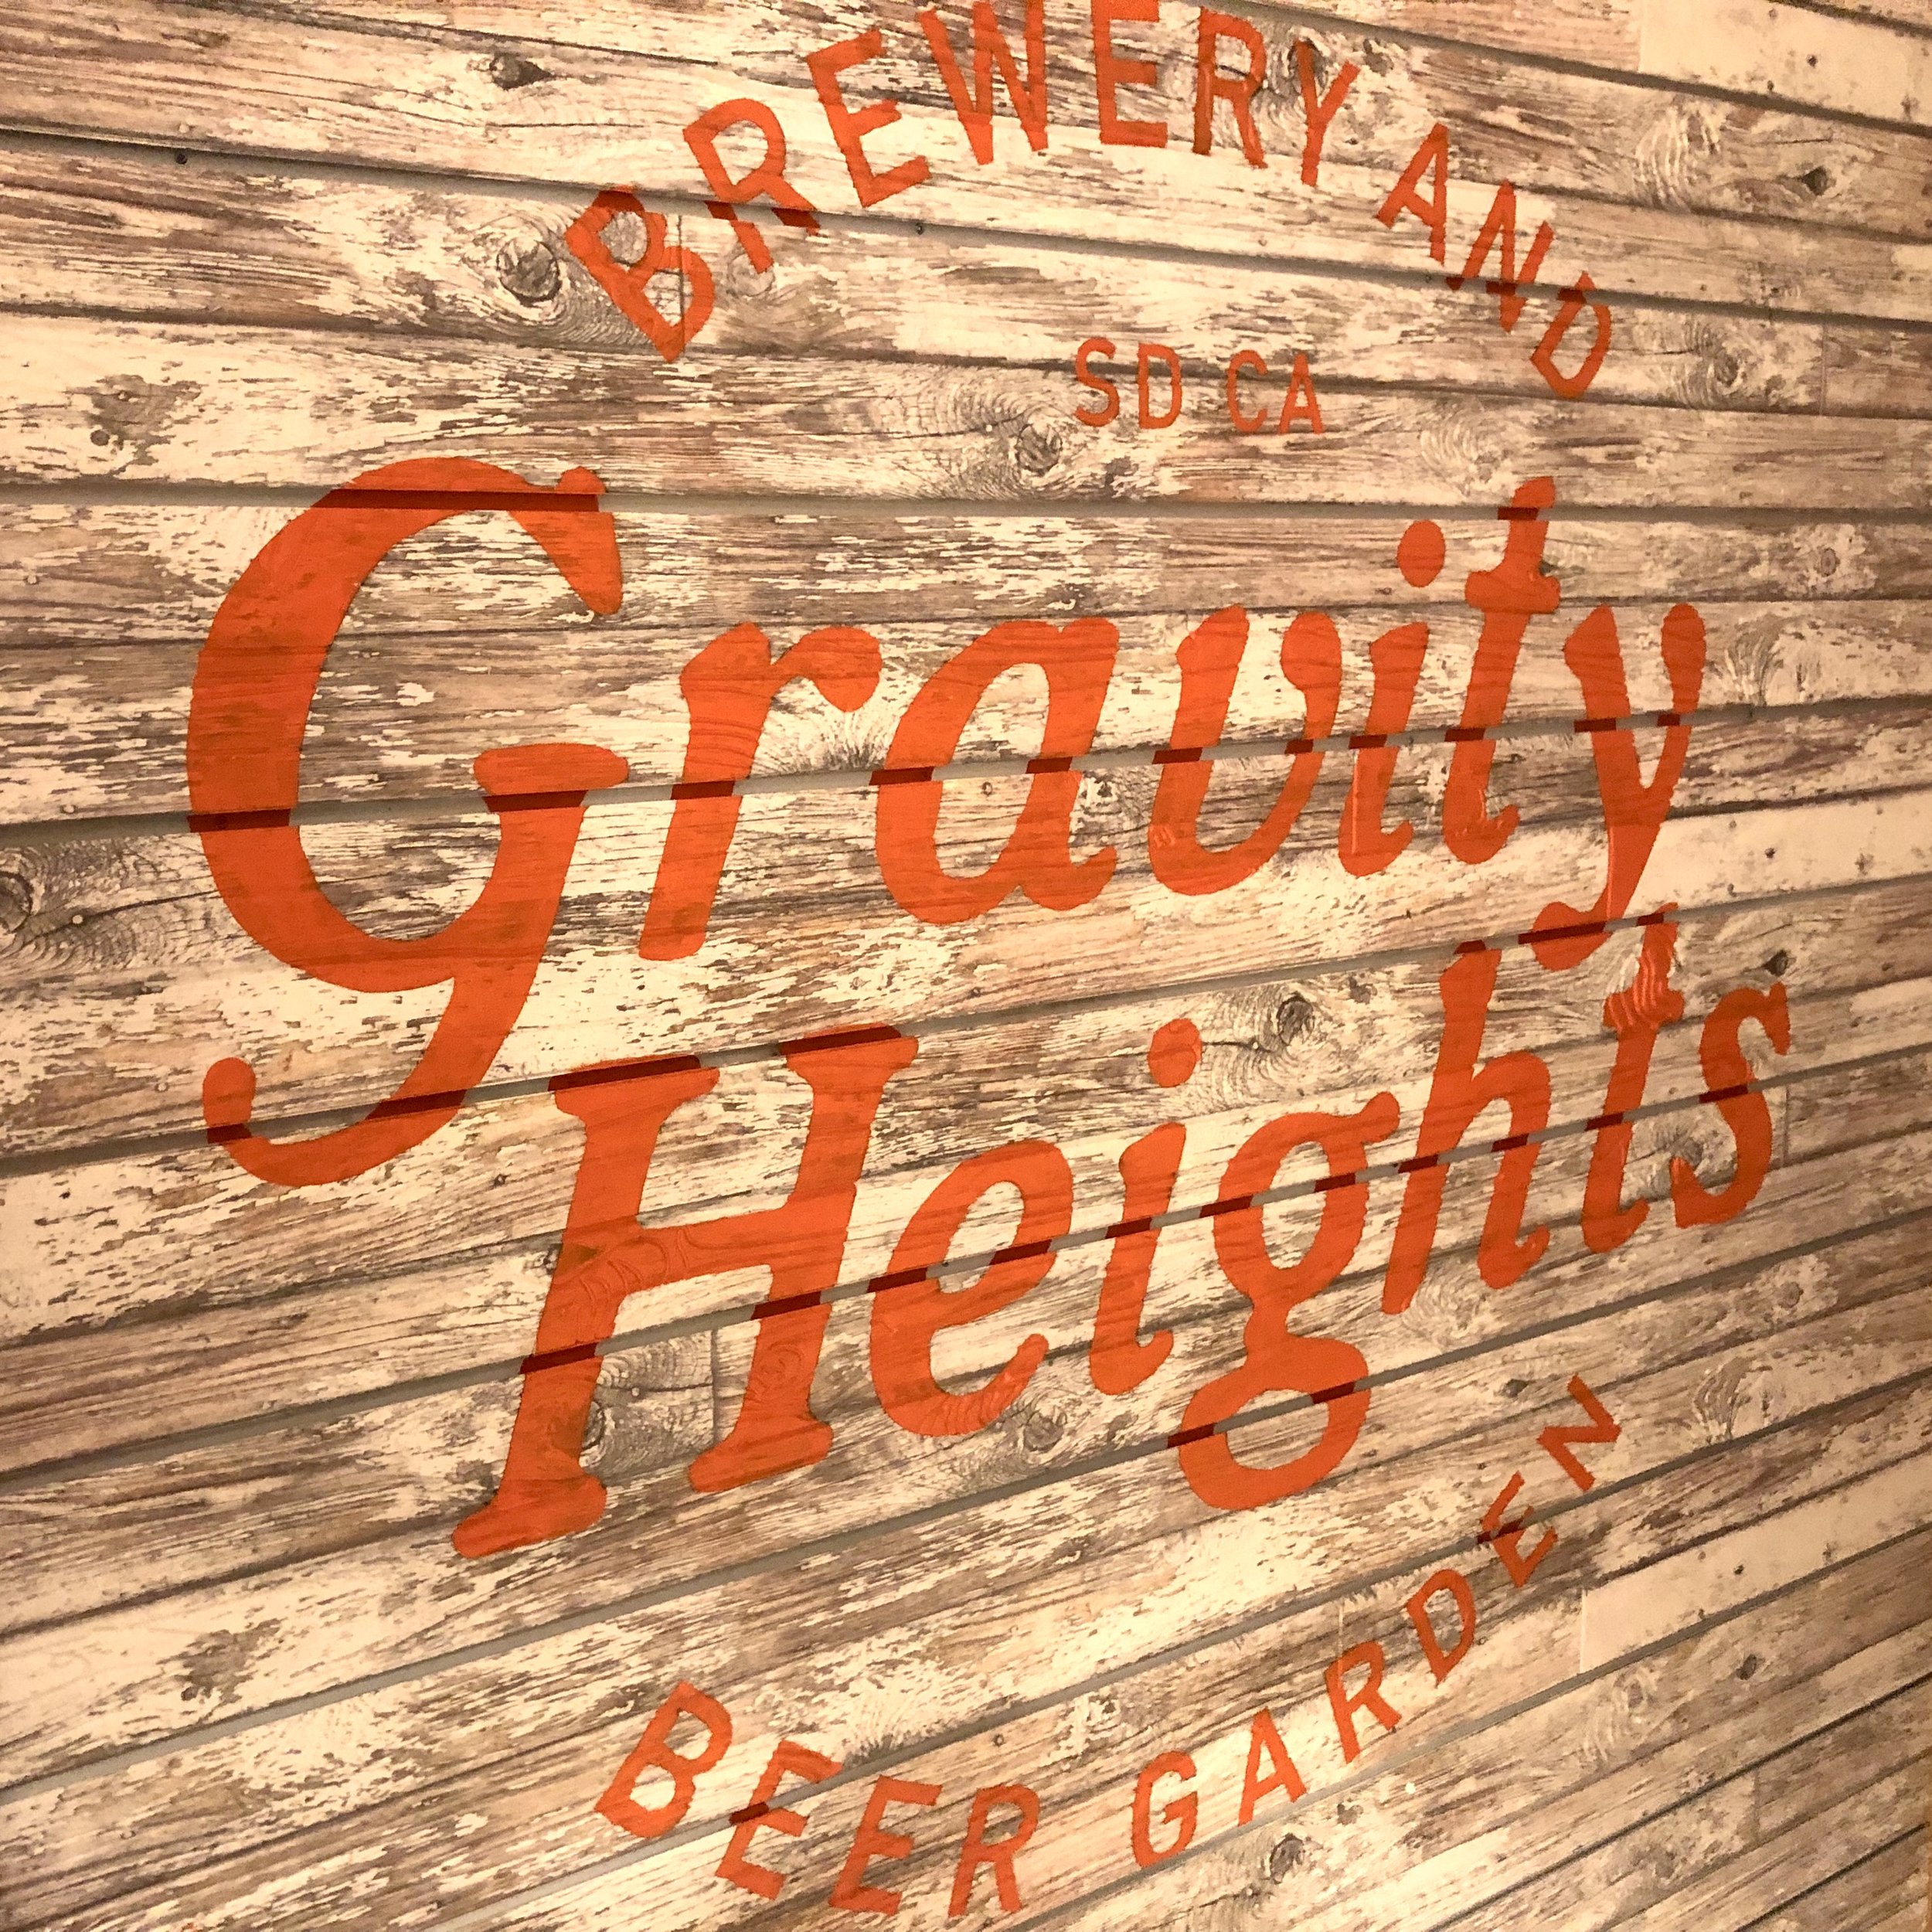 Gravity Heights Brewery San Diego hand painted brand logo